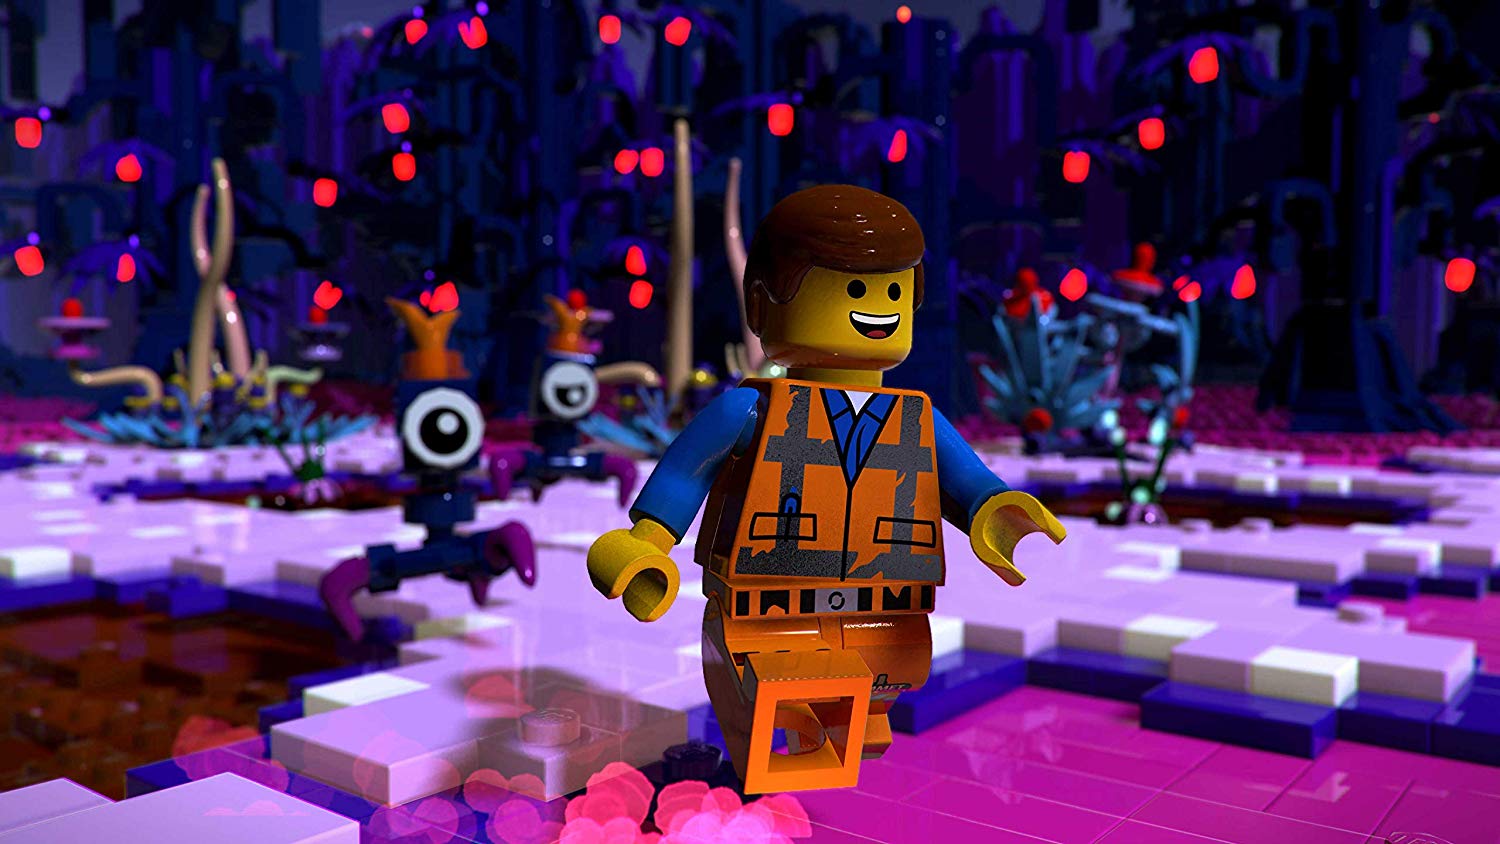 The LEGO Movie 2 Videogame - Nintendo Switch - image 2 of 4